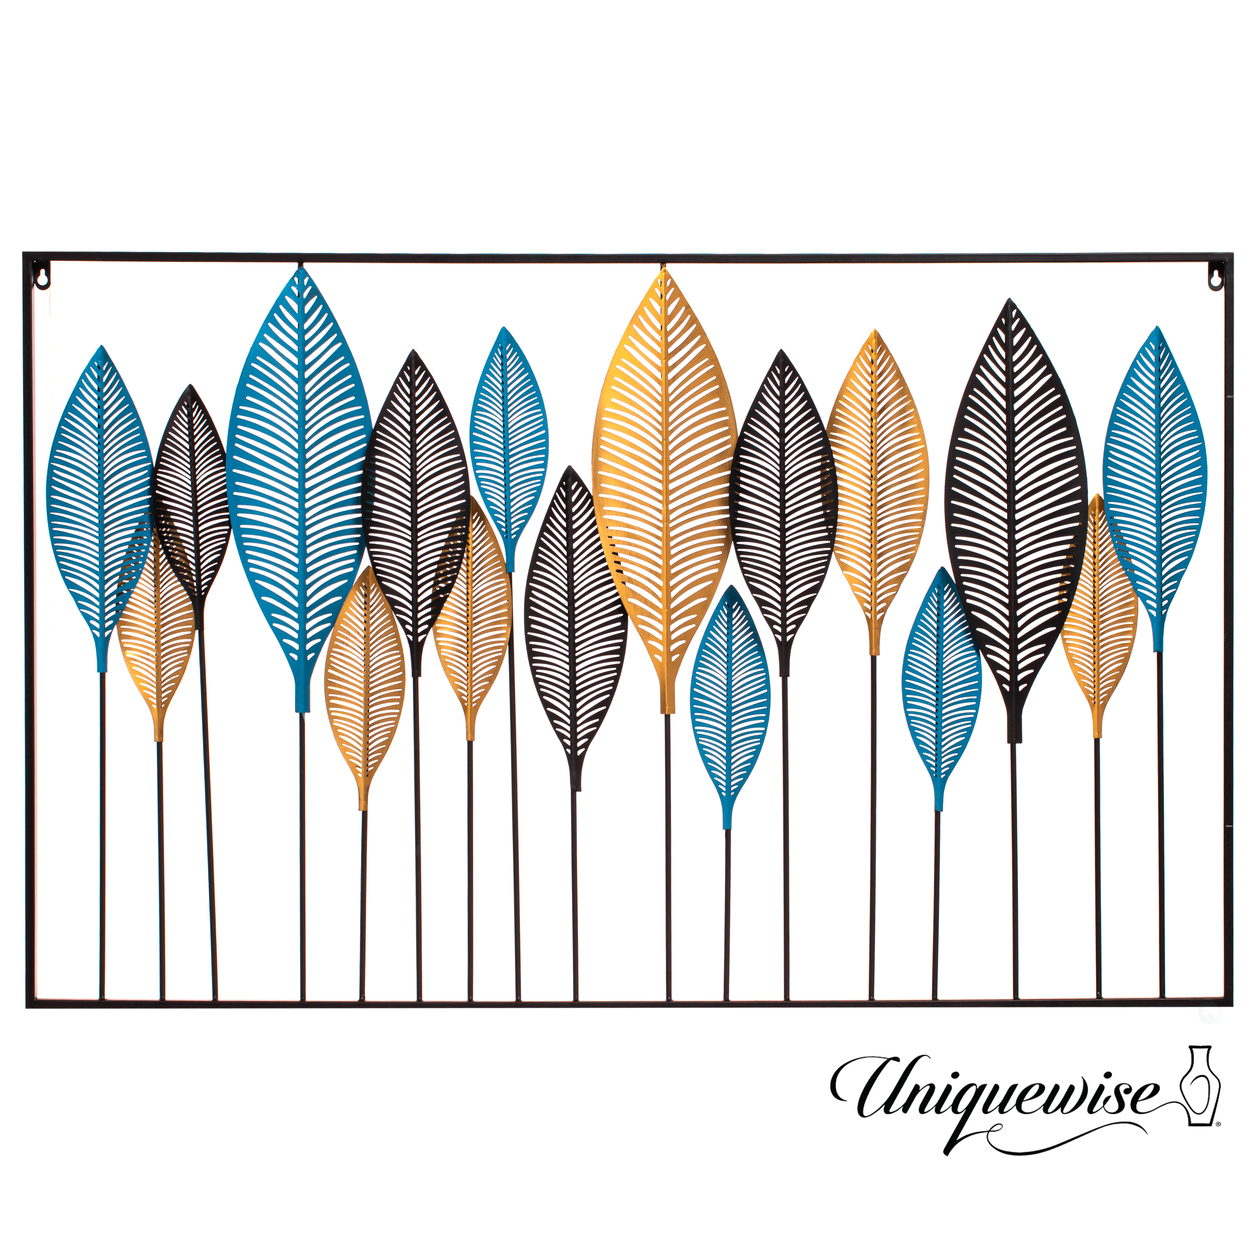 Exquisite Multicolor Leaf Artistry Metal Wall DÃ©cor For Entryway, Dining Room, Kitchen, Office, Bedroom And Hallway